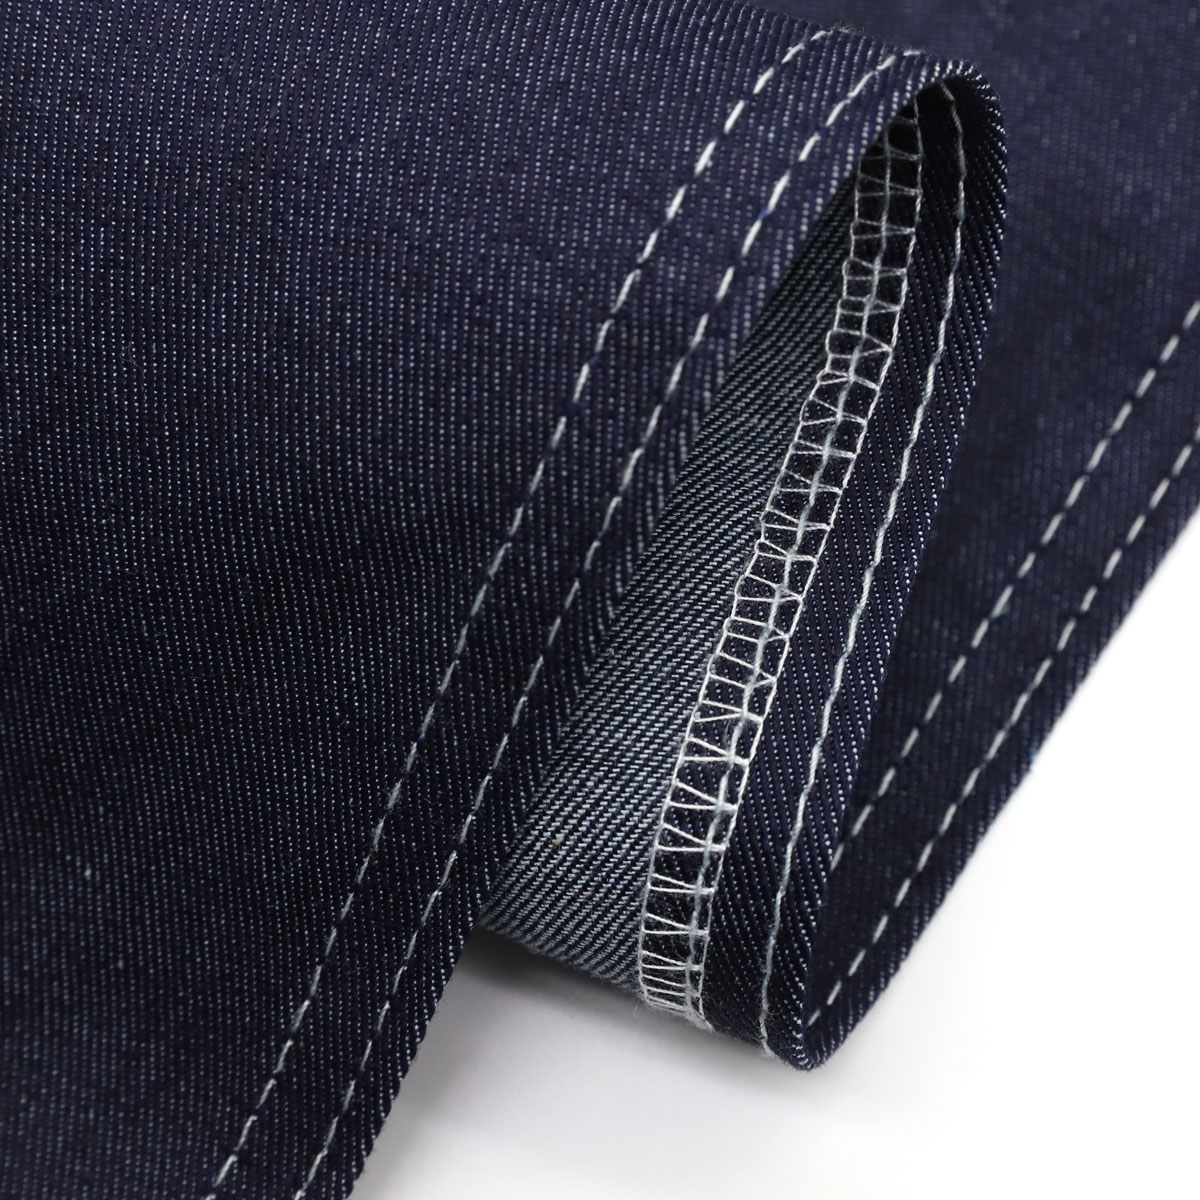 Tips for Choosing the Best Non-stretch Denim Fabric 1